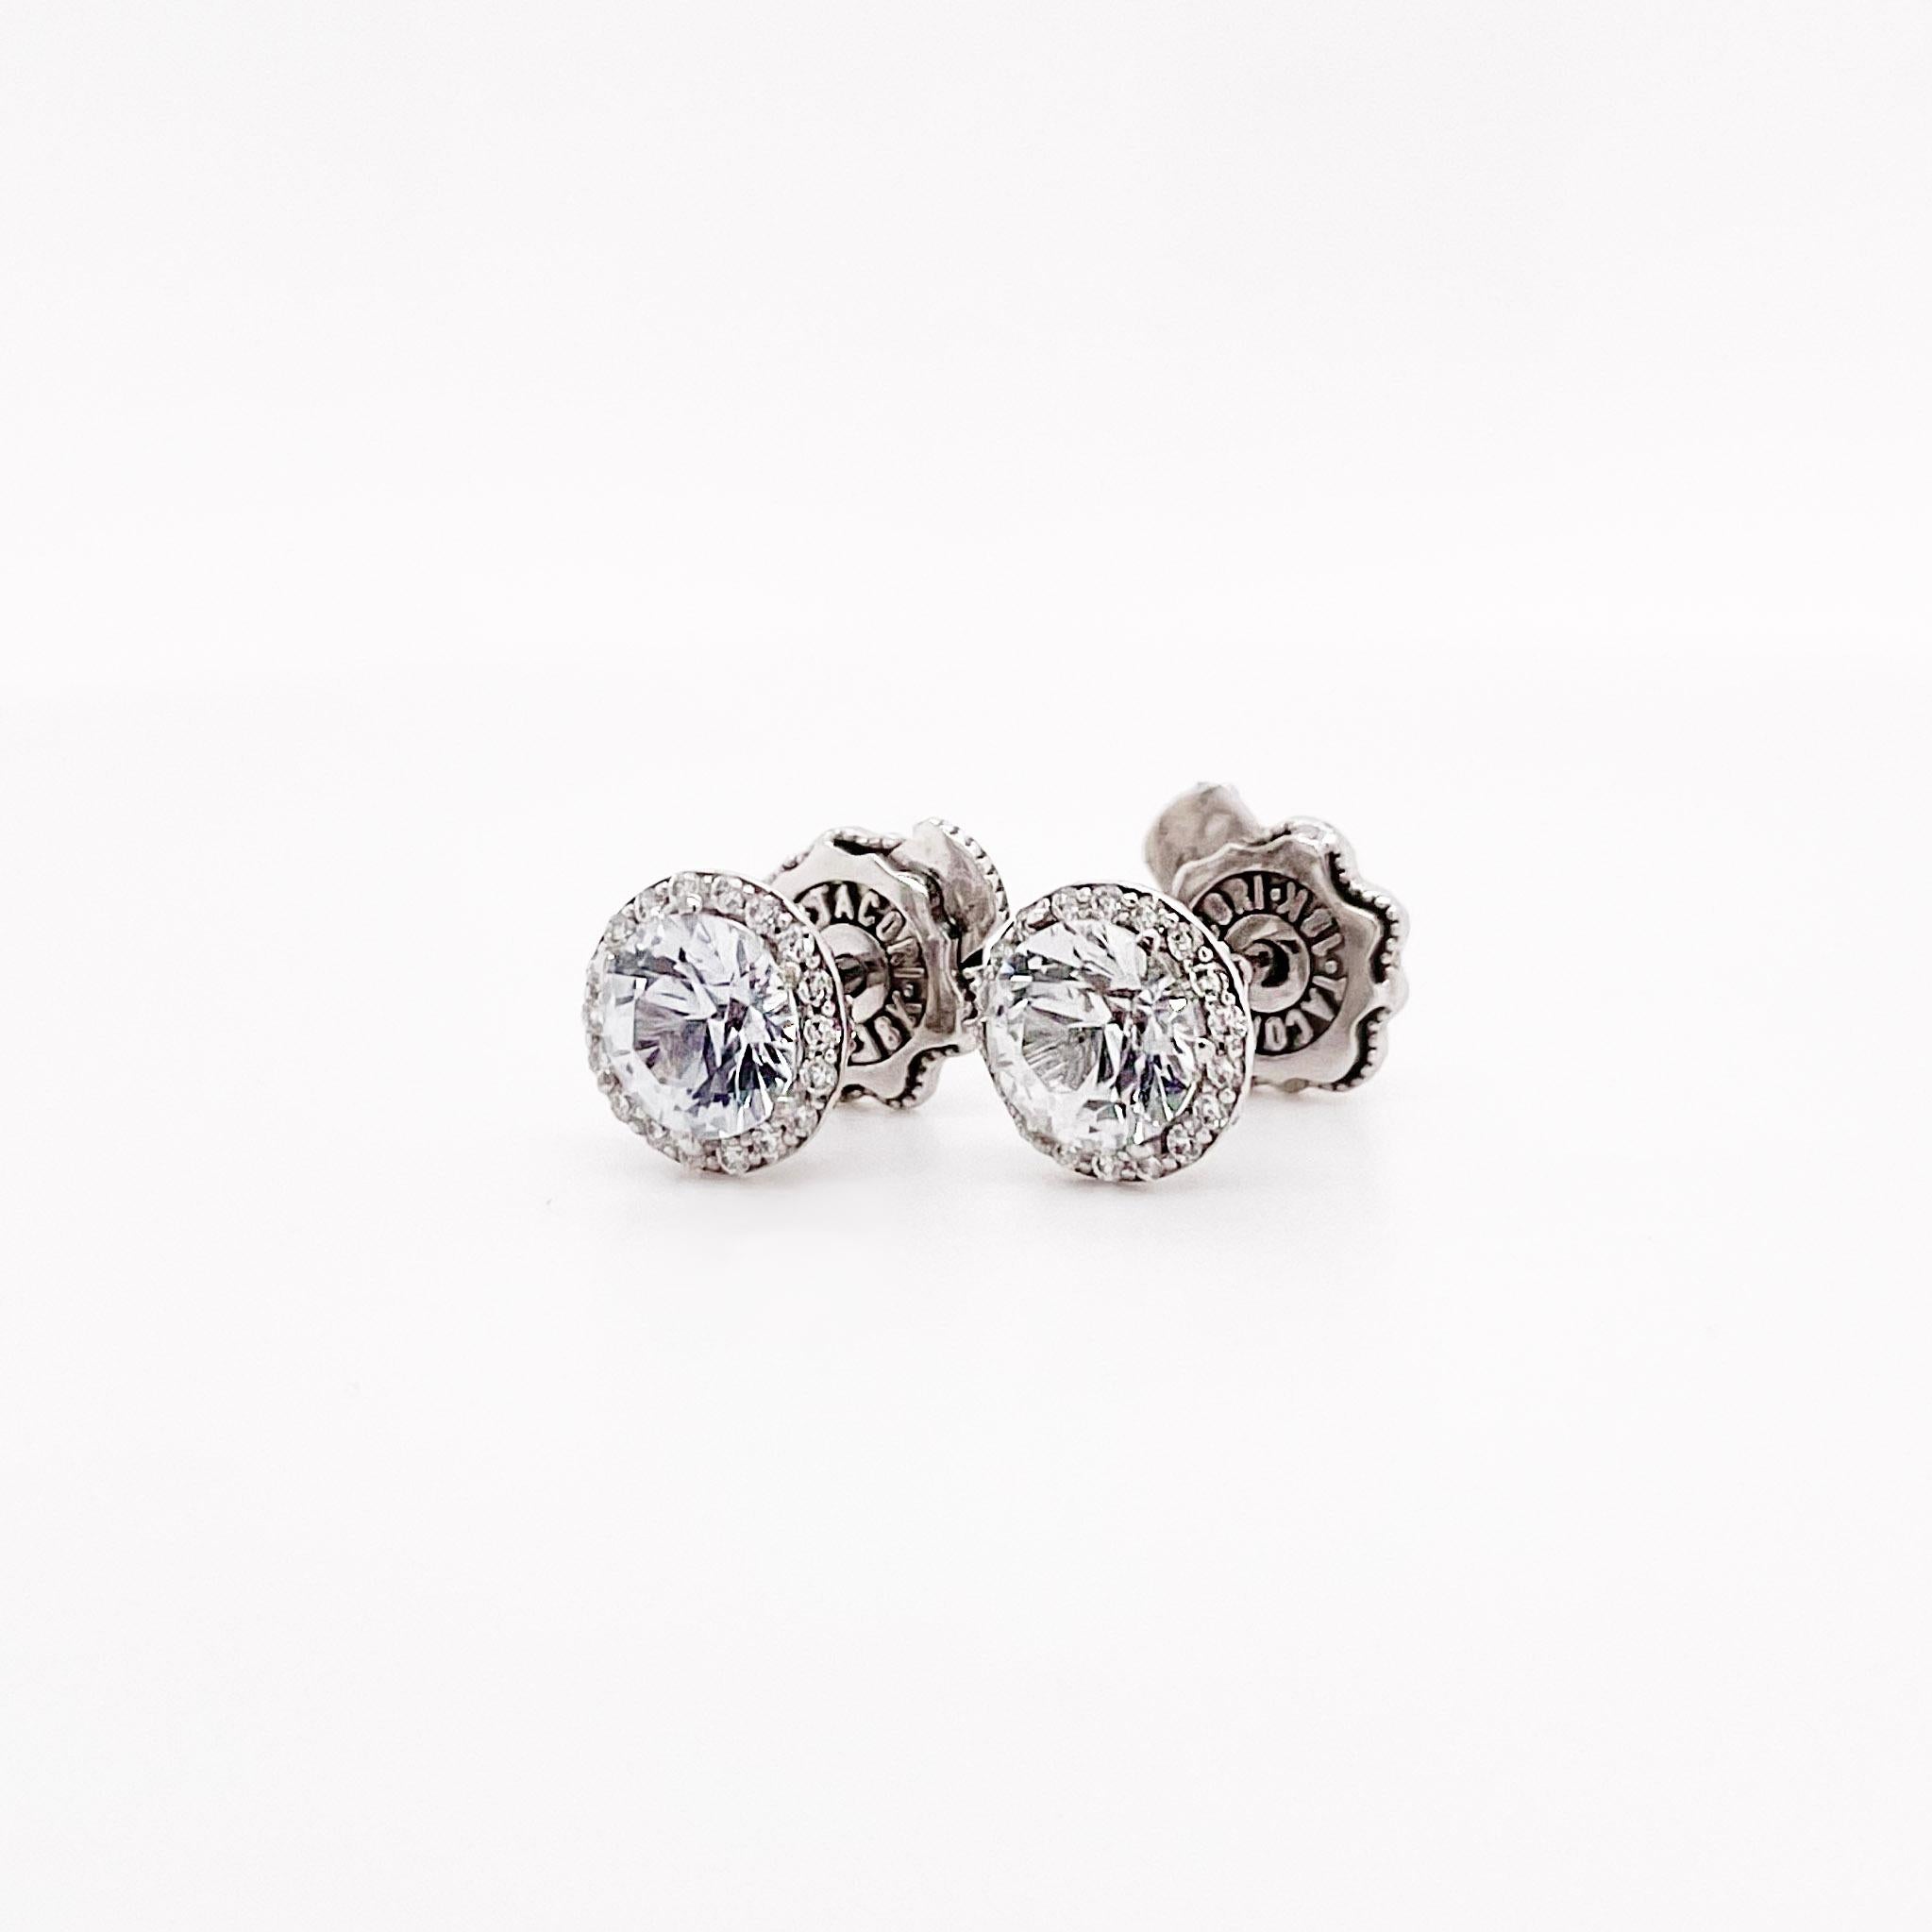 Stunning, Original Tacori Diamond Earrings w White Sapphire in the Center. This gorgeous piece is an original Tacori design with a genuine, natural white sapphire with a diamond halo. Tacori is known for their magnificent workmanship and quality of